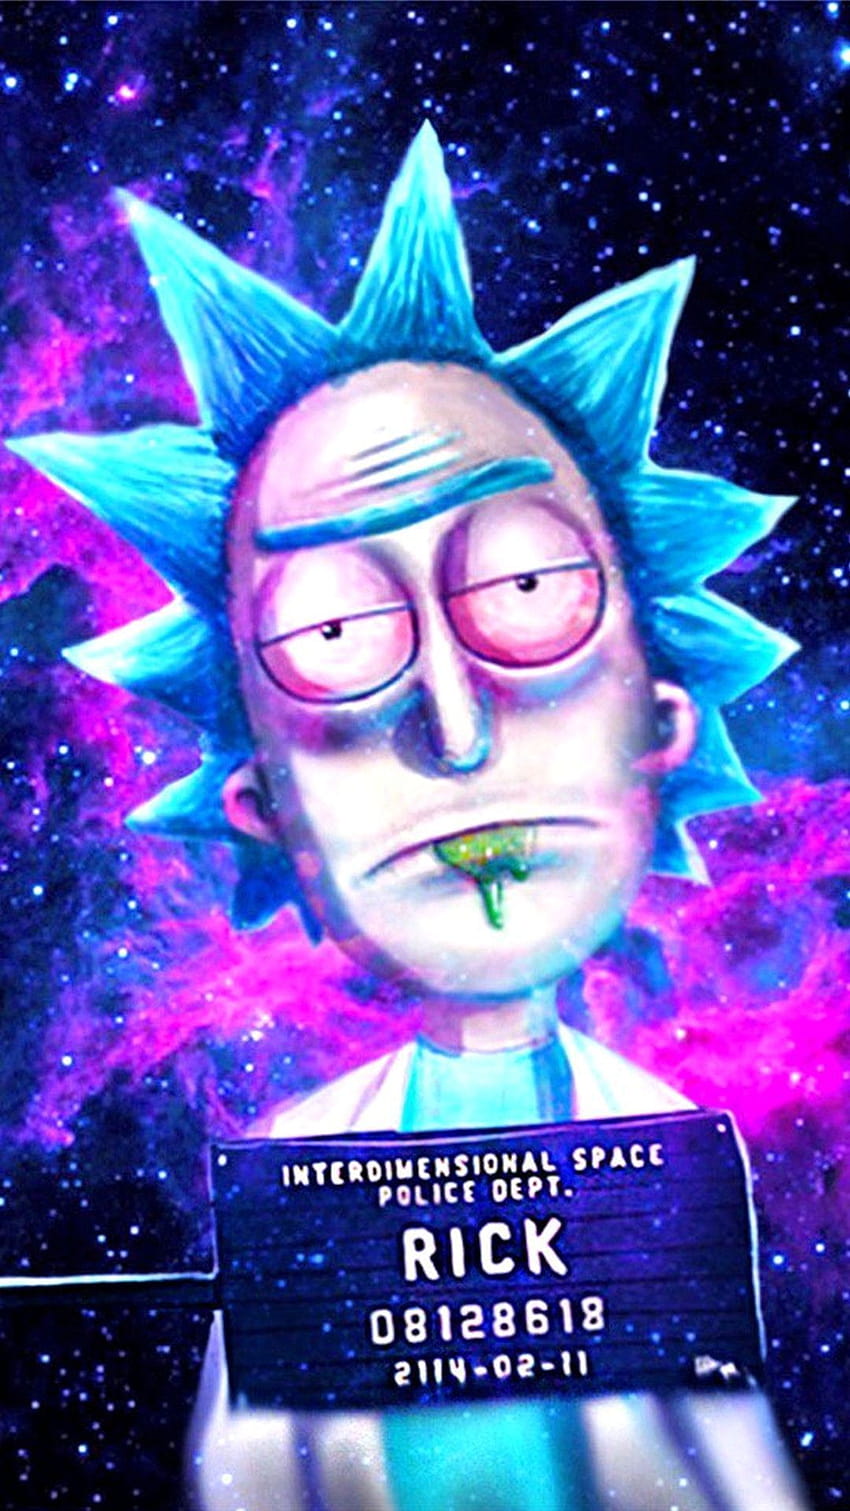 Rick Aesthetic Art Rick And Morty Free Wallpaper download  Download Free Rick  Aesthetic Art Rick And Morty HD Wallpapers to your mobile phone or tablet